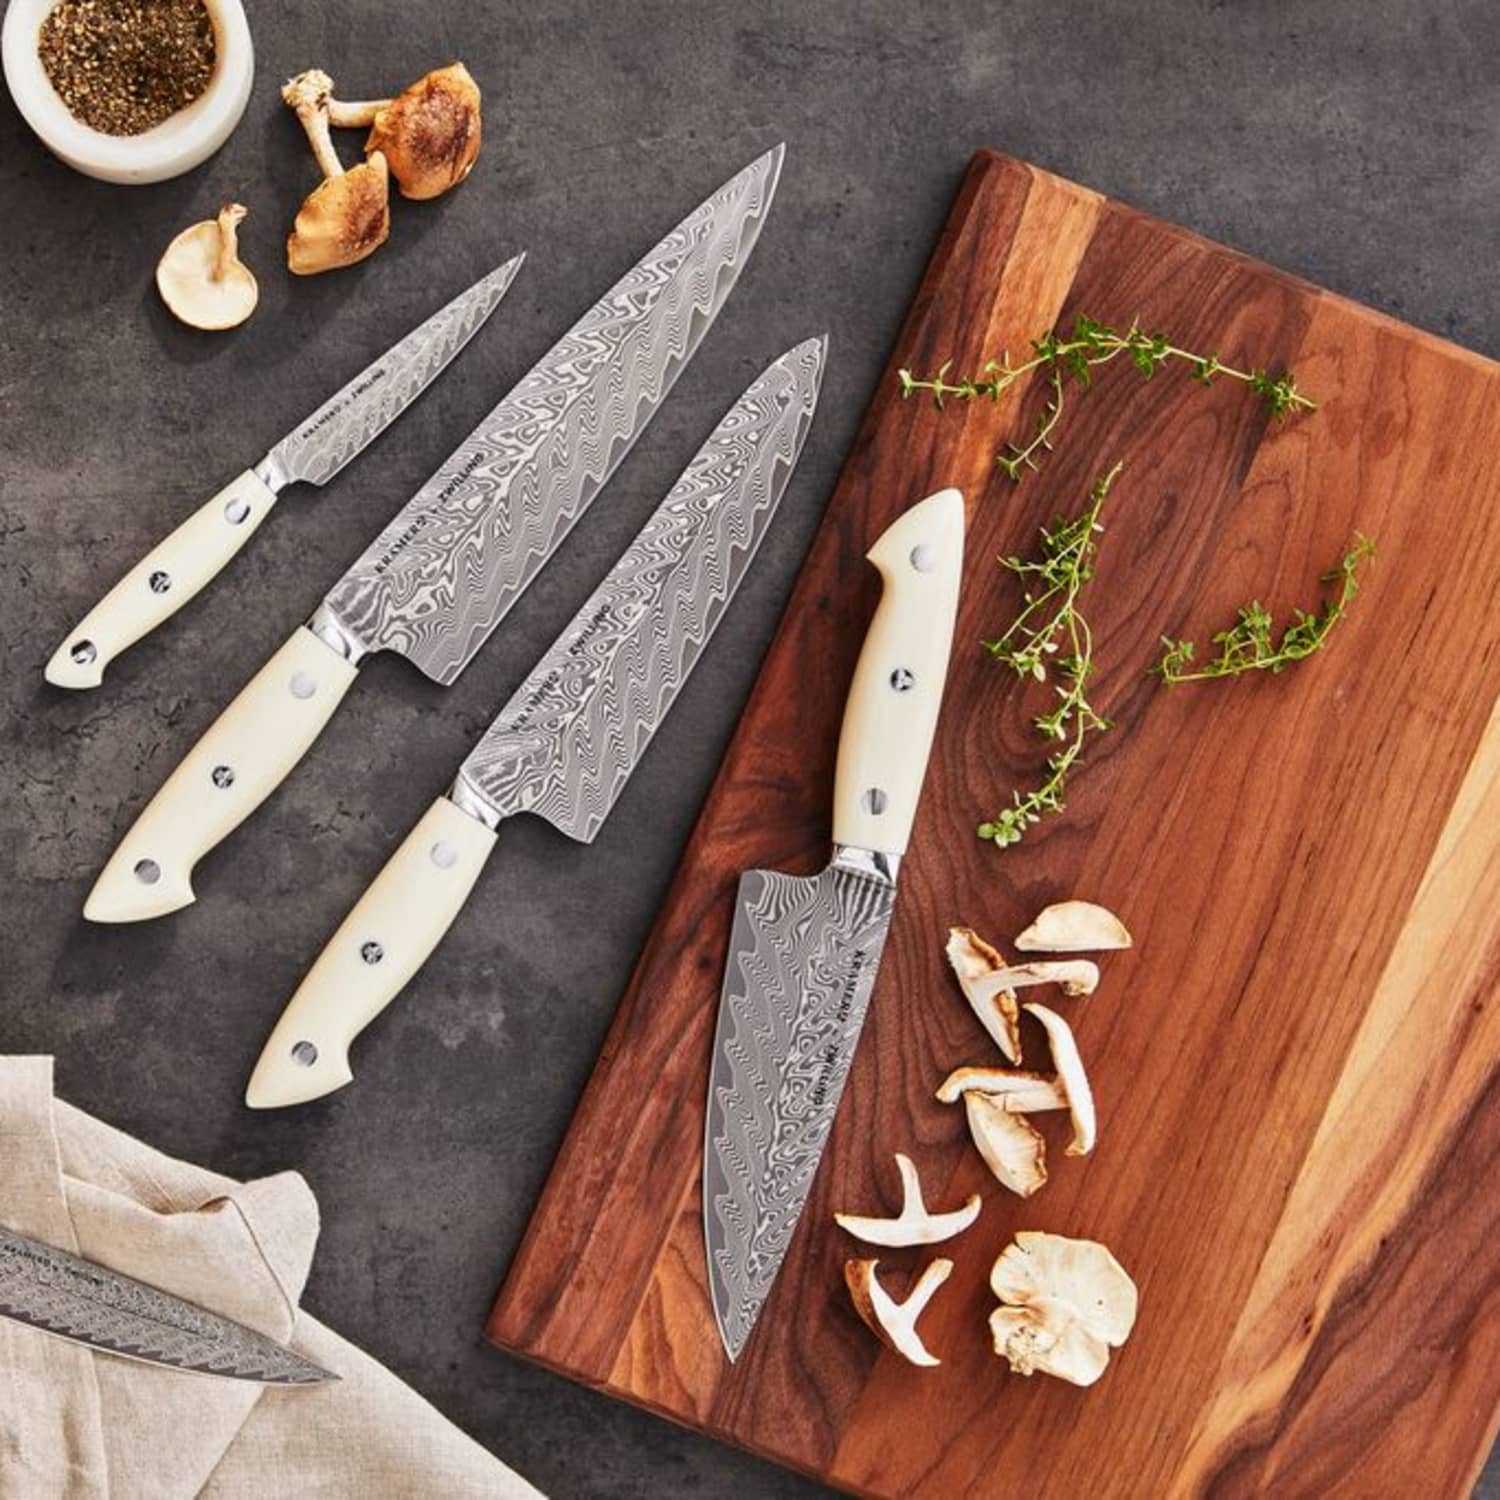 Sur La Table's Newest Knife Collection Is a Chef's Dream